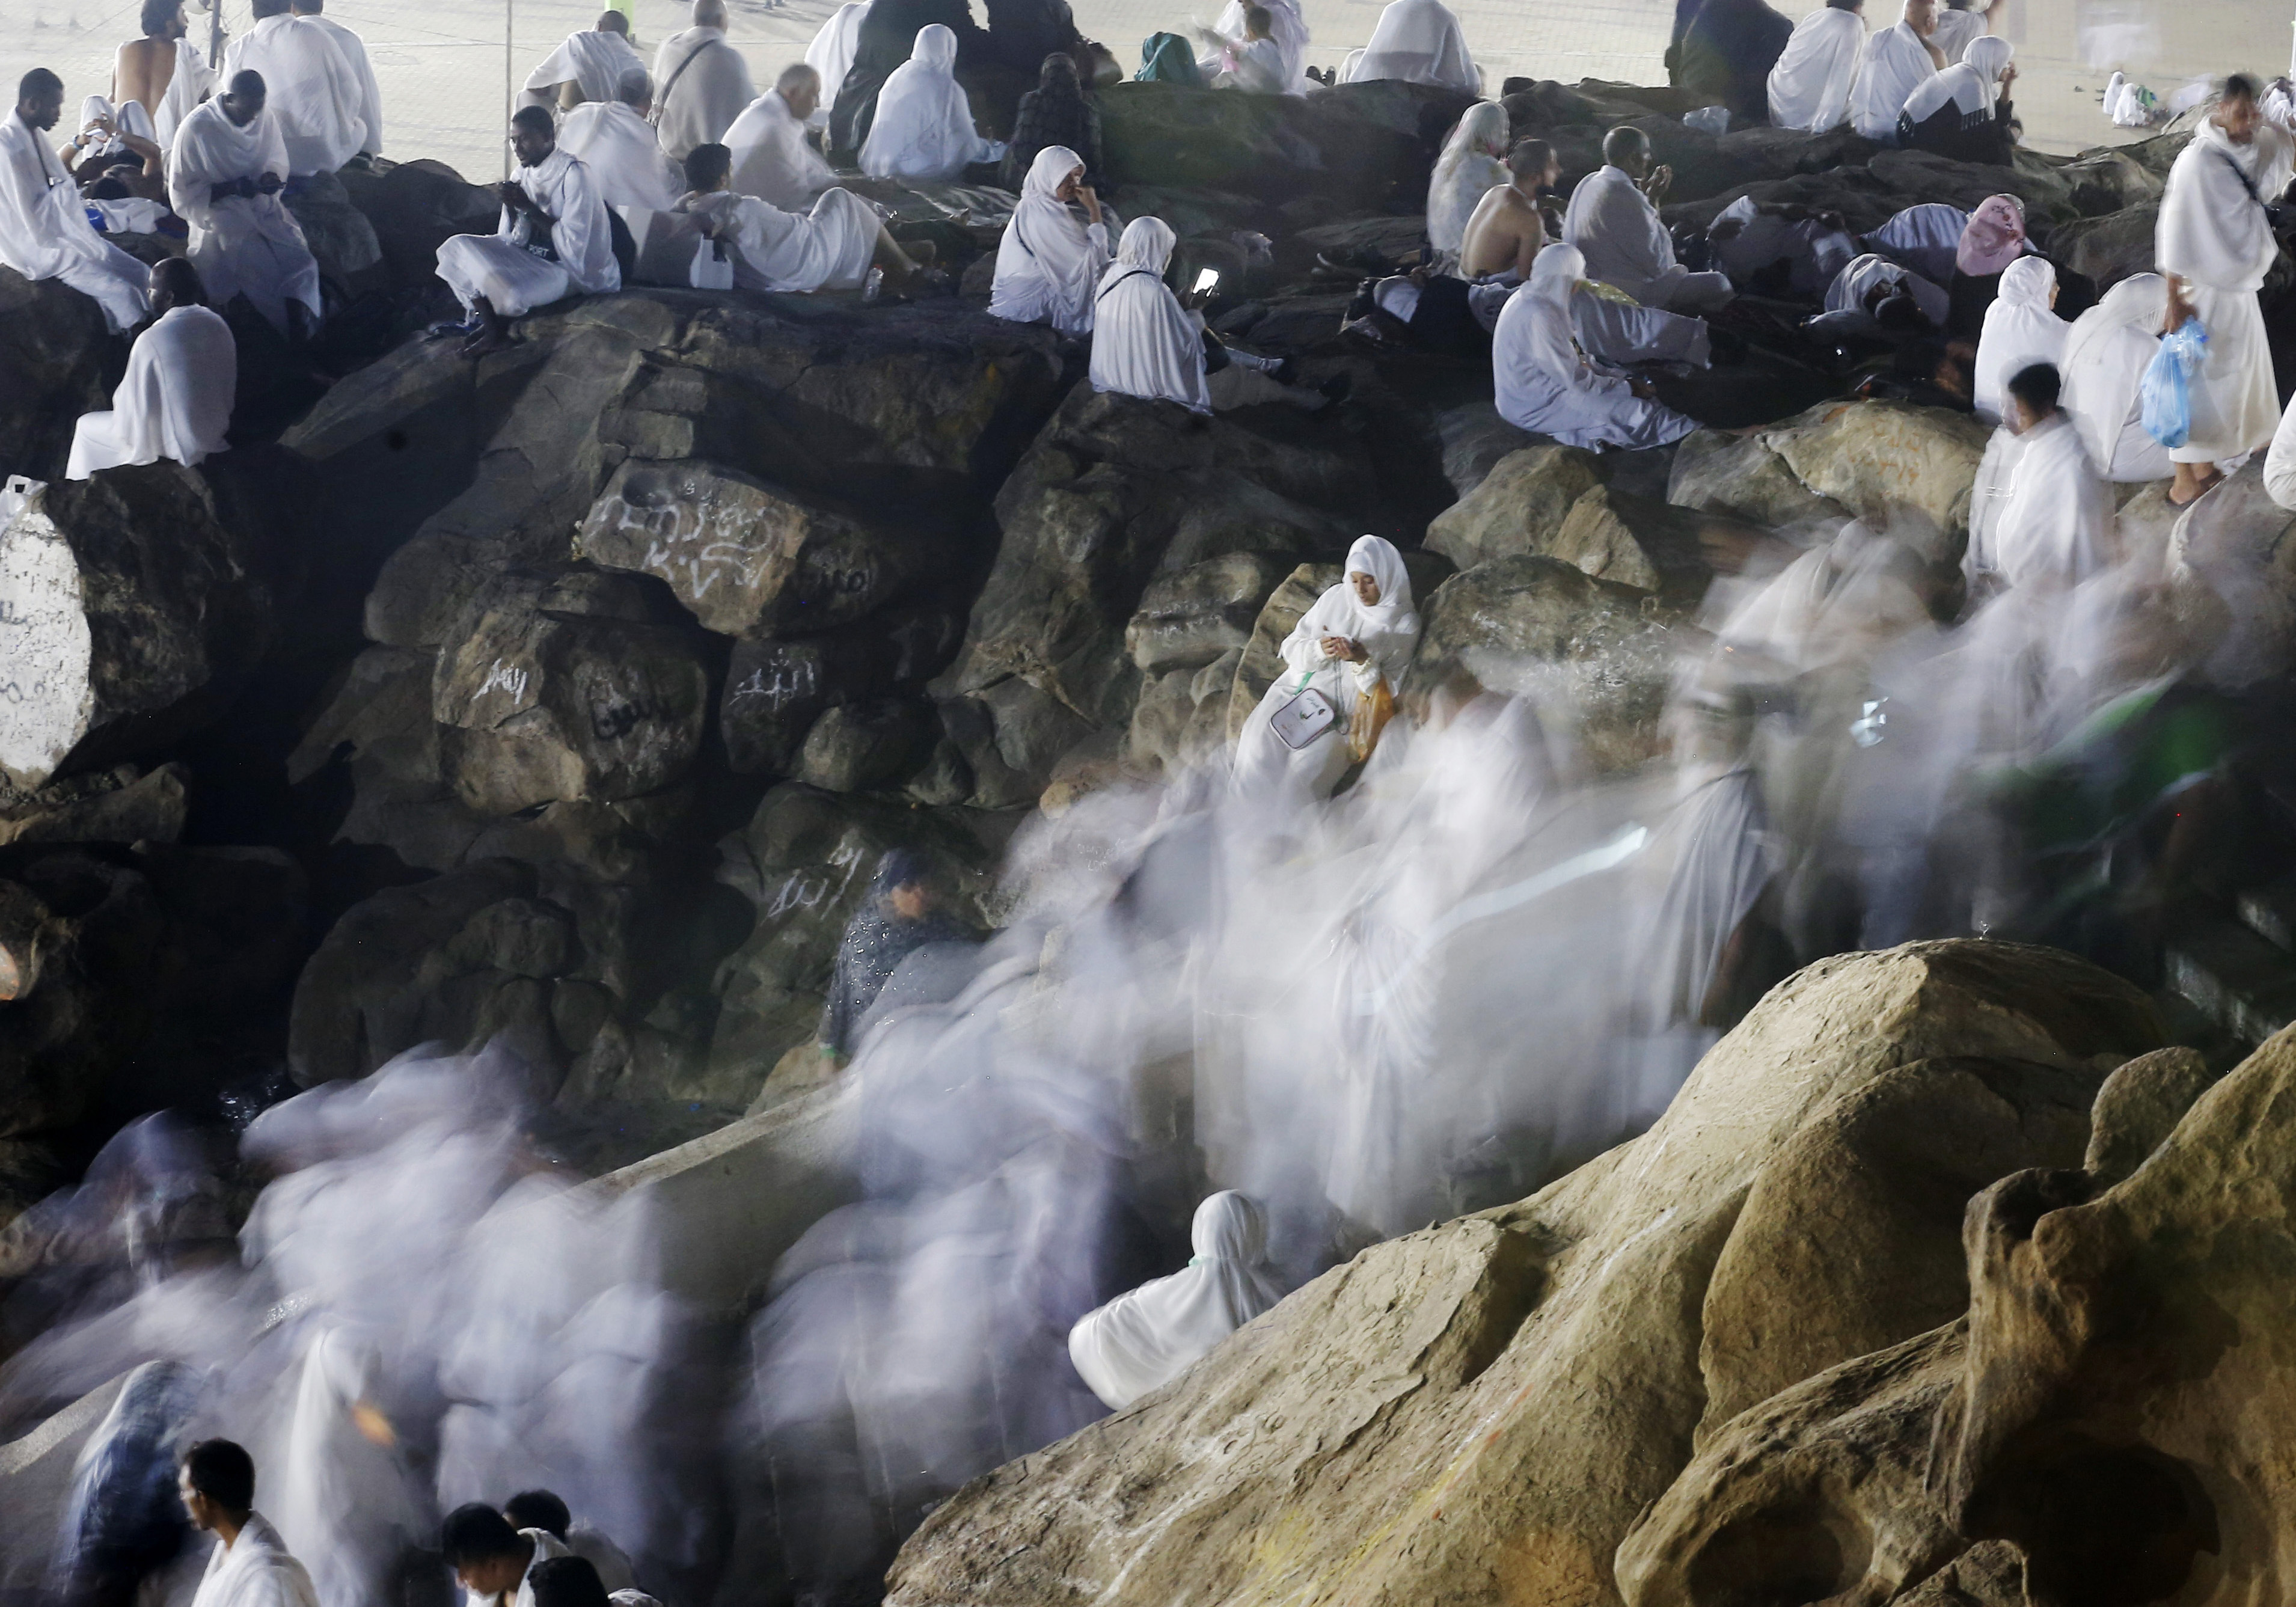 Muslim pilgrims make their way up a rocky hill known as Mountain of Mercy on the Plain of Arafat during the annual Haj pilgrimage in August 2019